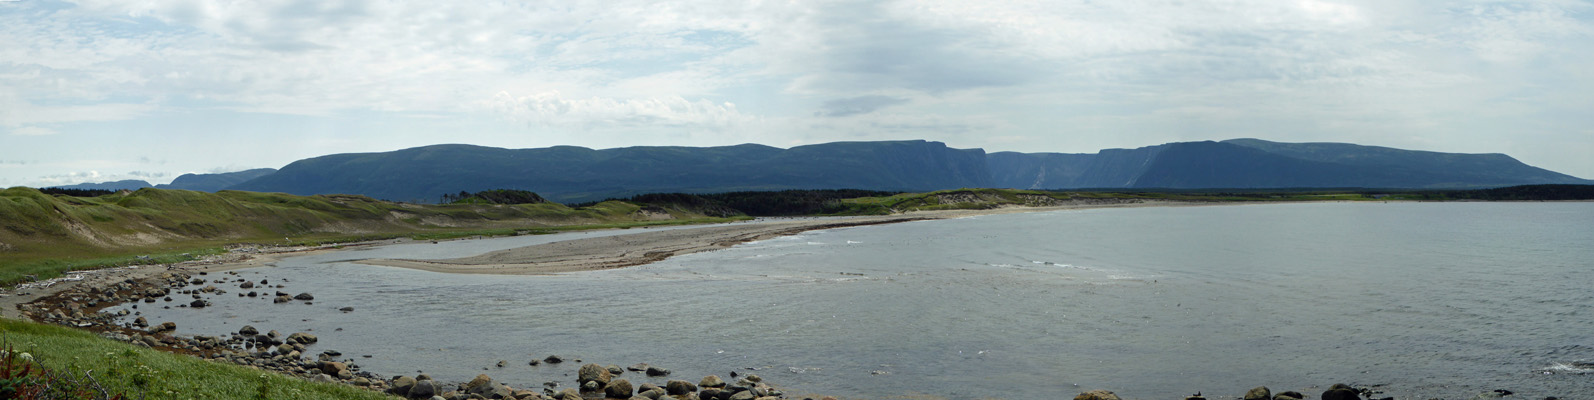 Mouth of Western Brook